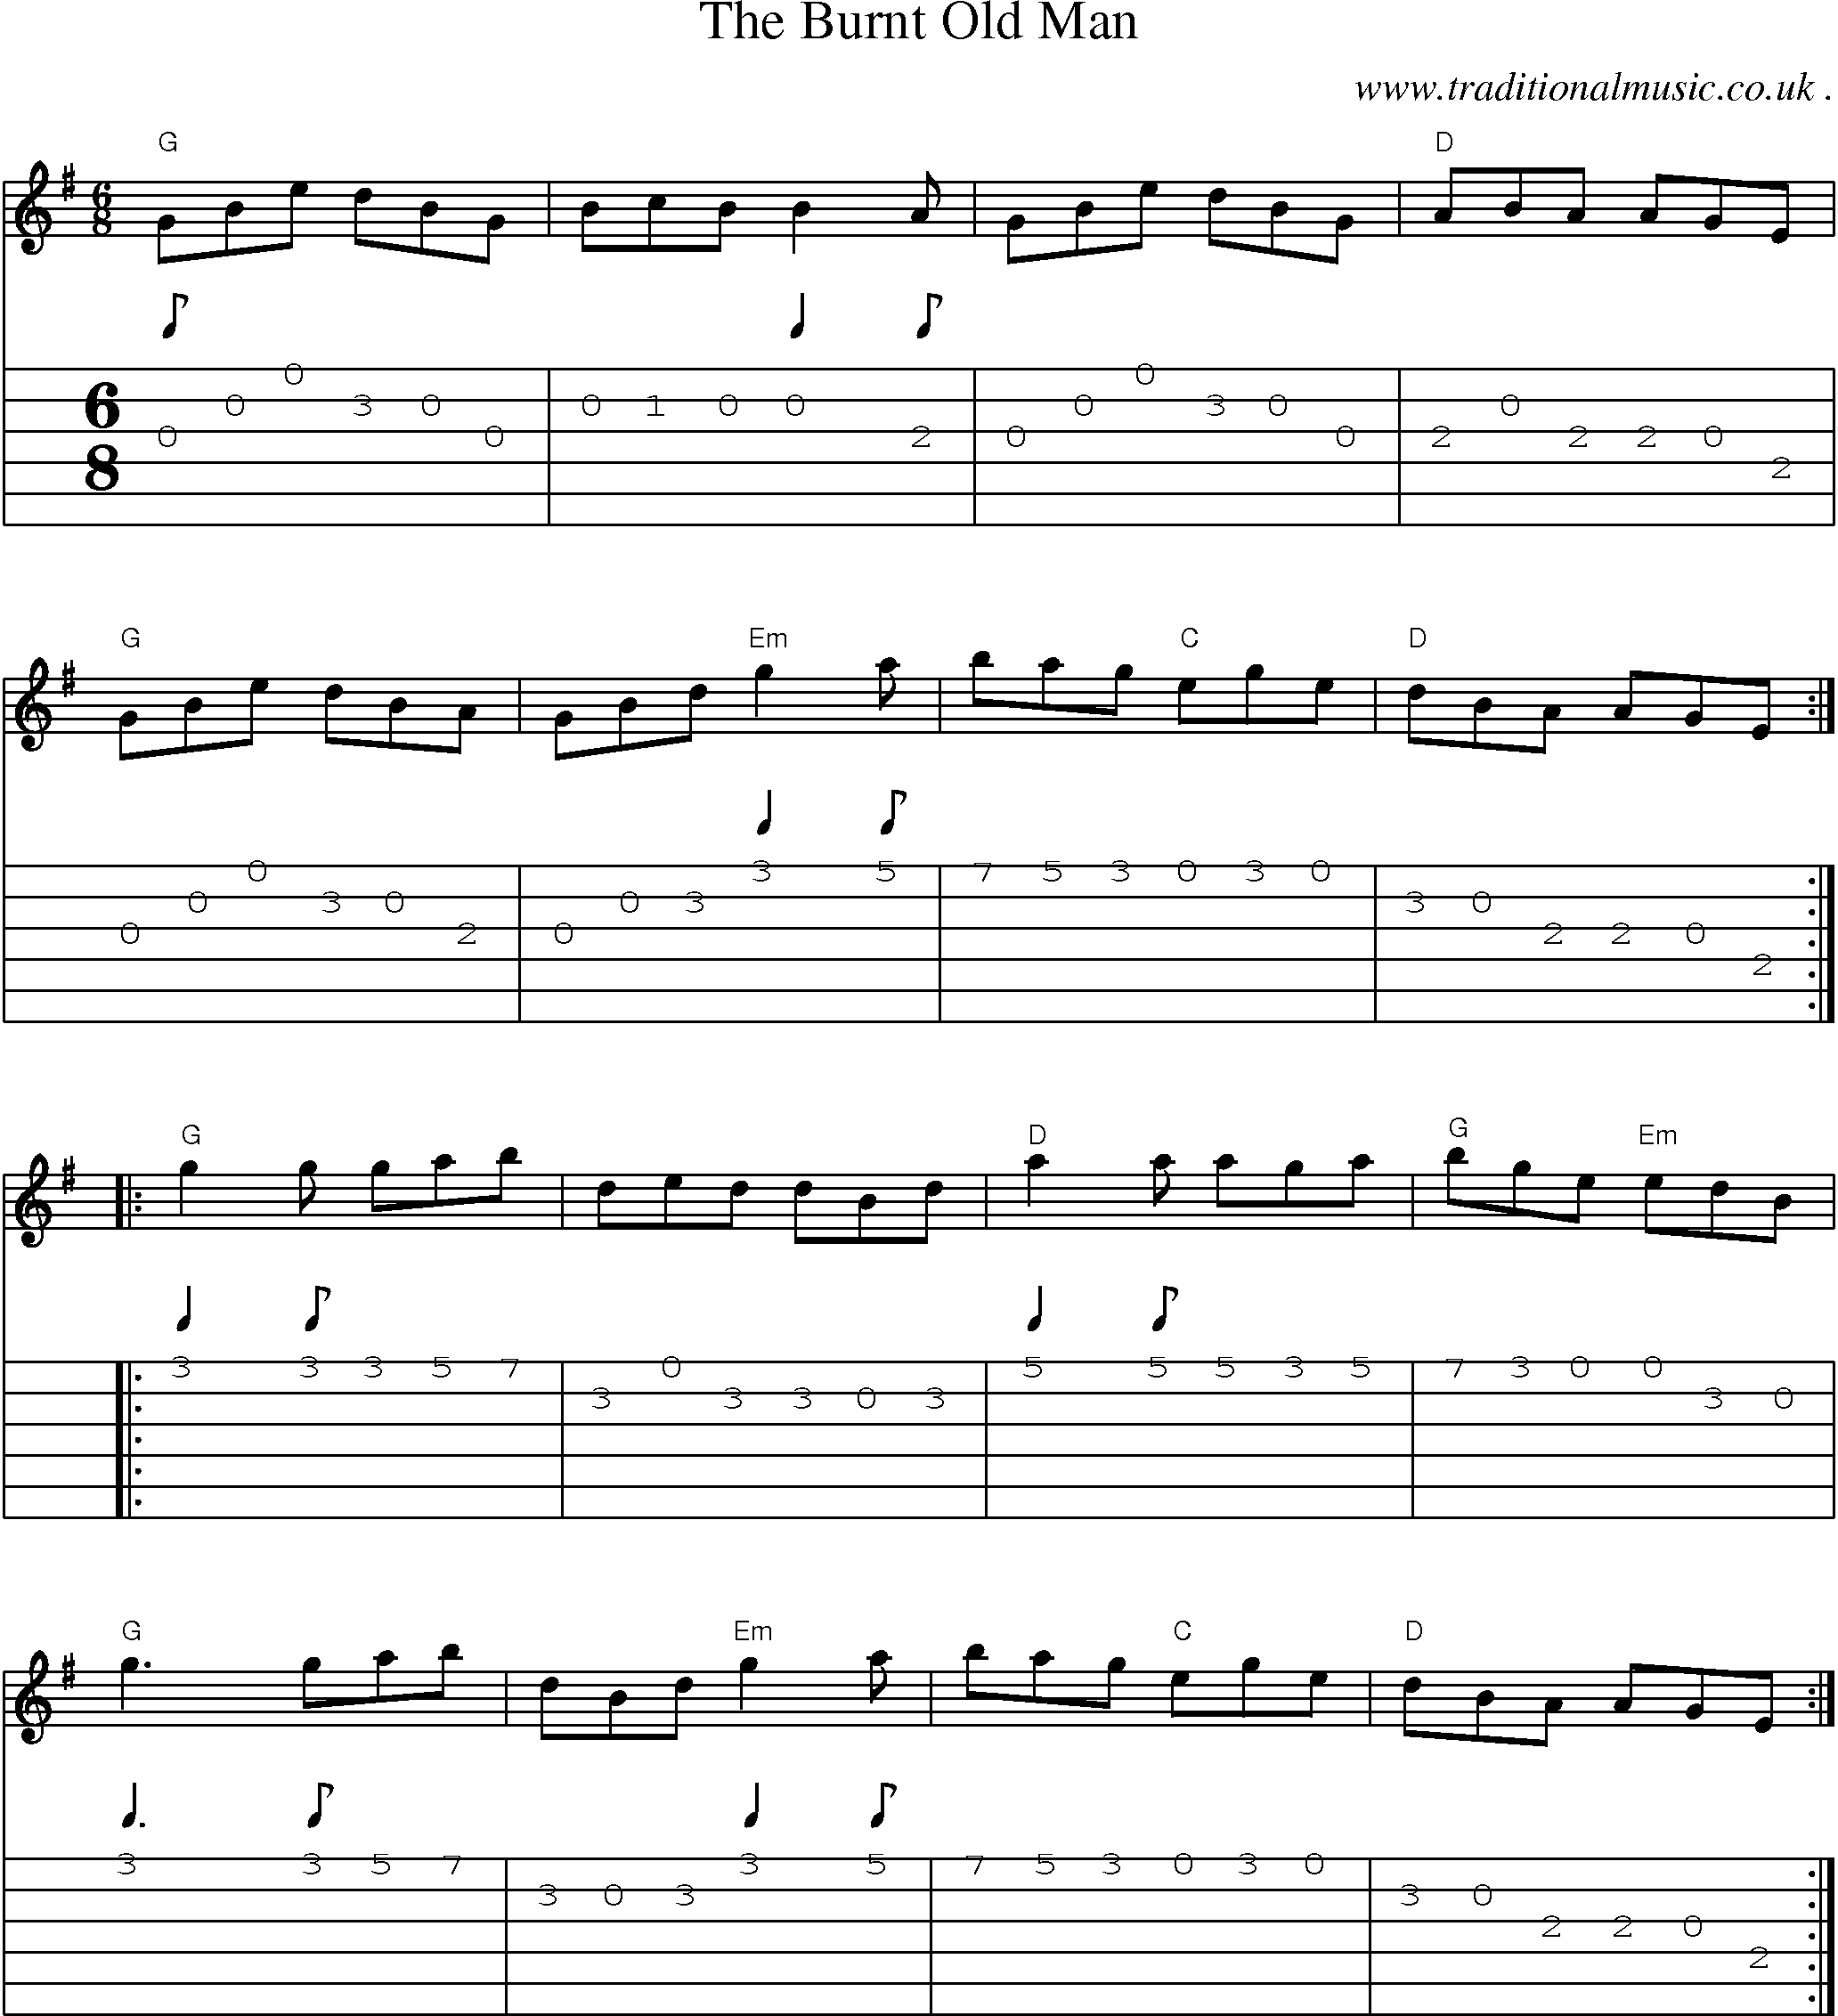 Music Score and Guitar Tabs for The Burnt Old Man